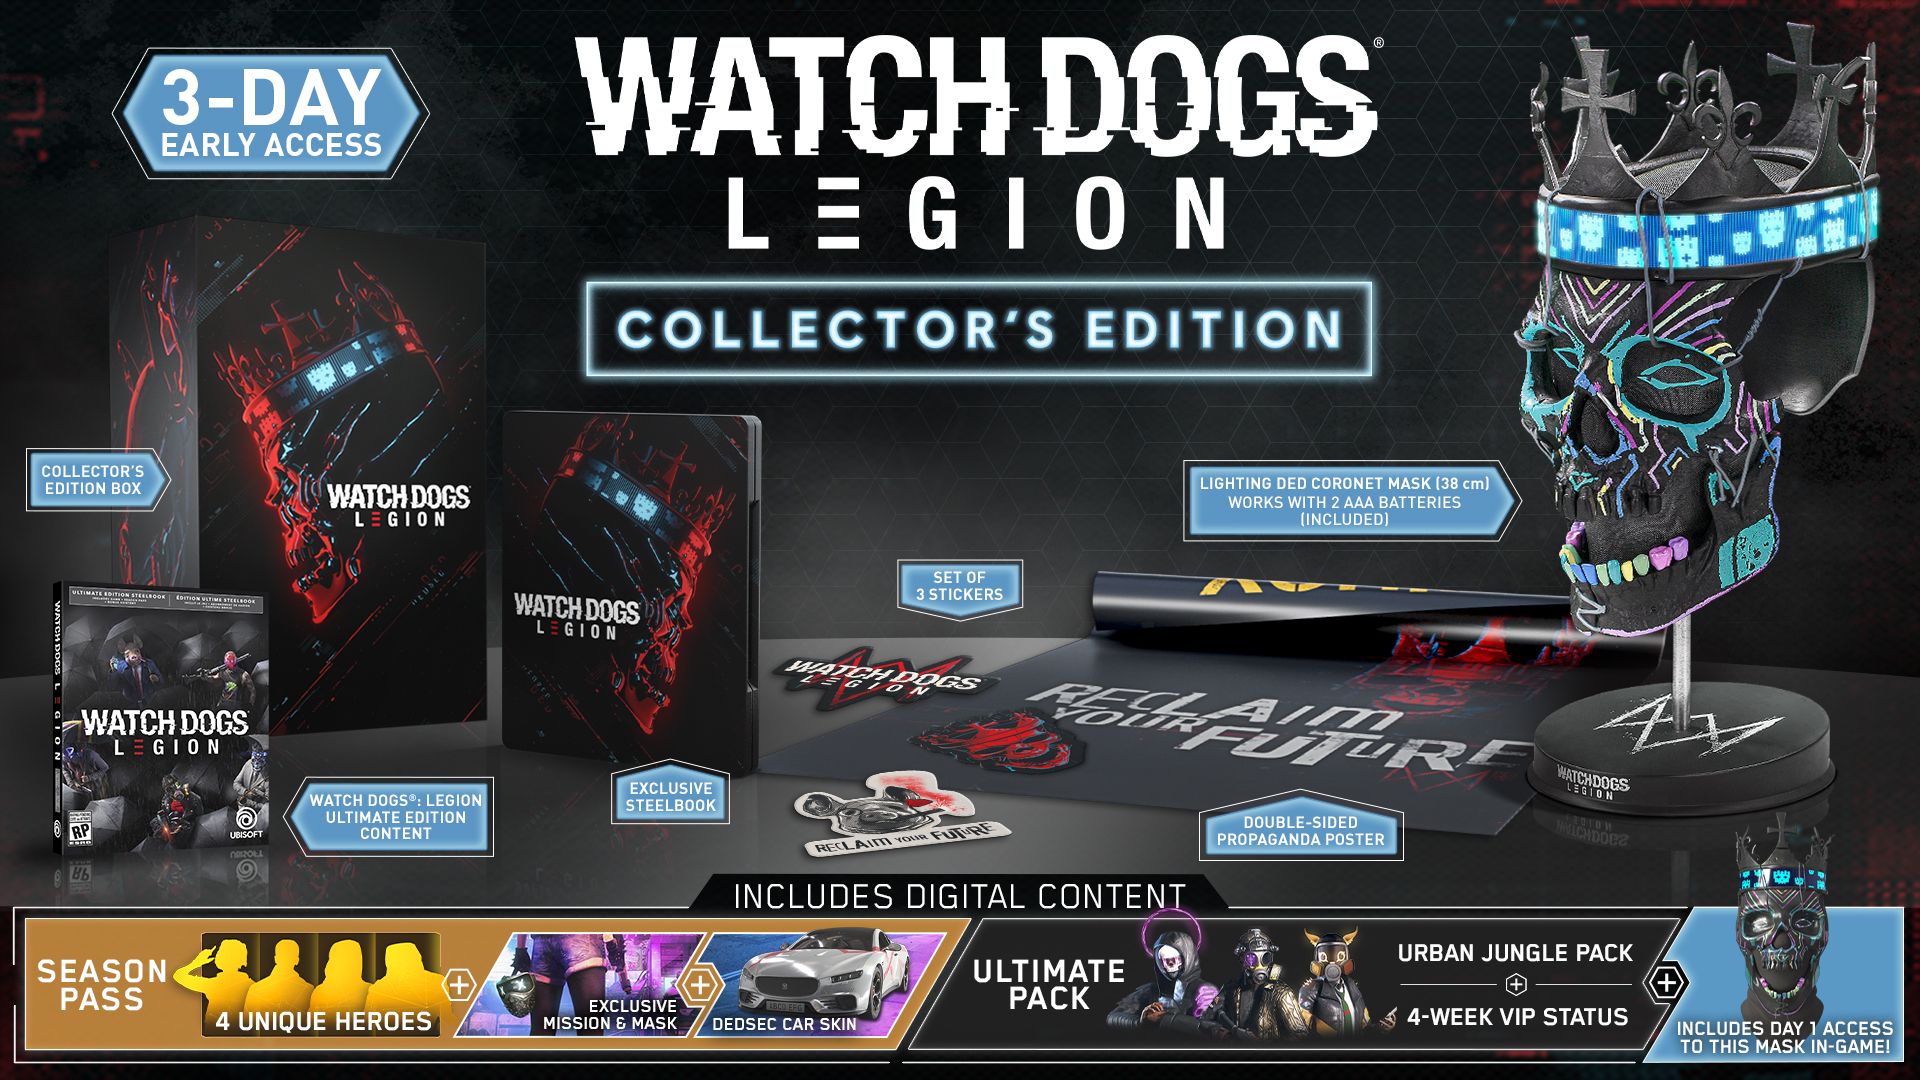 watch dogs ps4 price